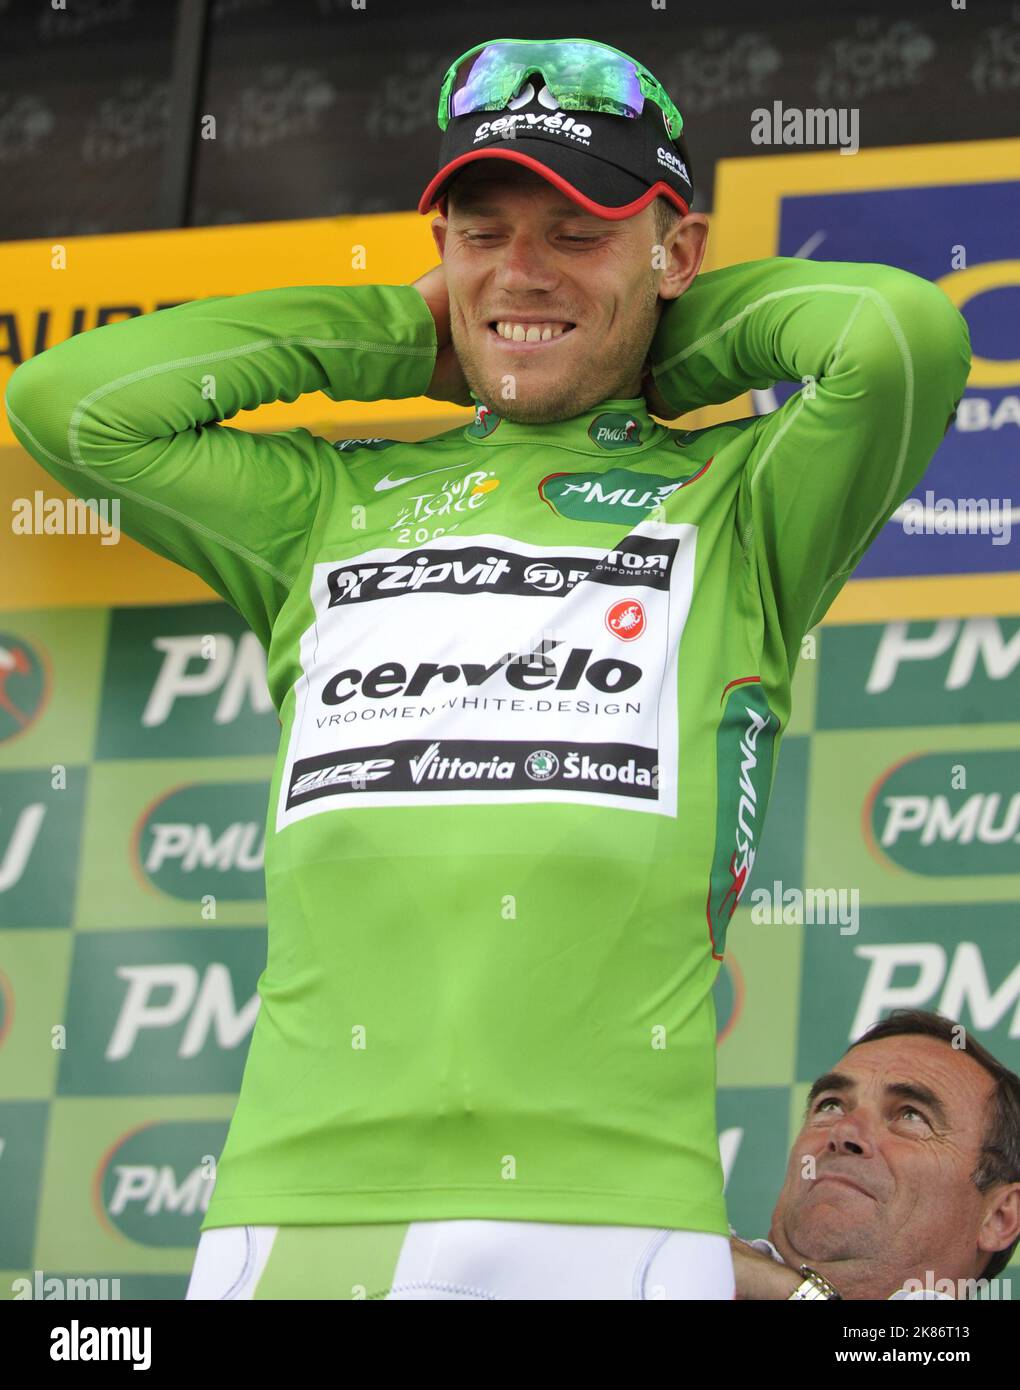 Thor Hishovd stands on the podium and receives the green points jersey Stock Photo